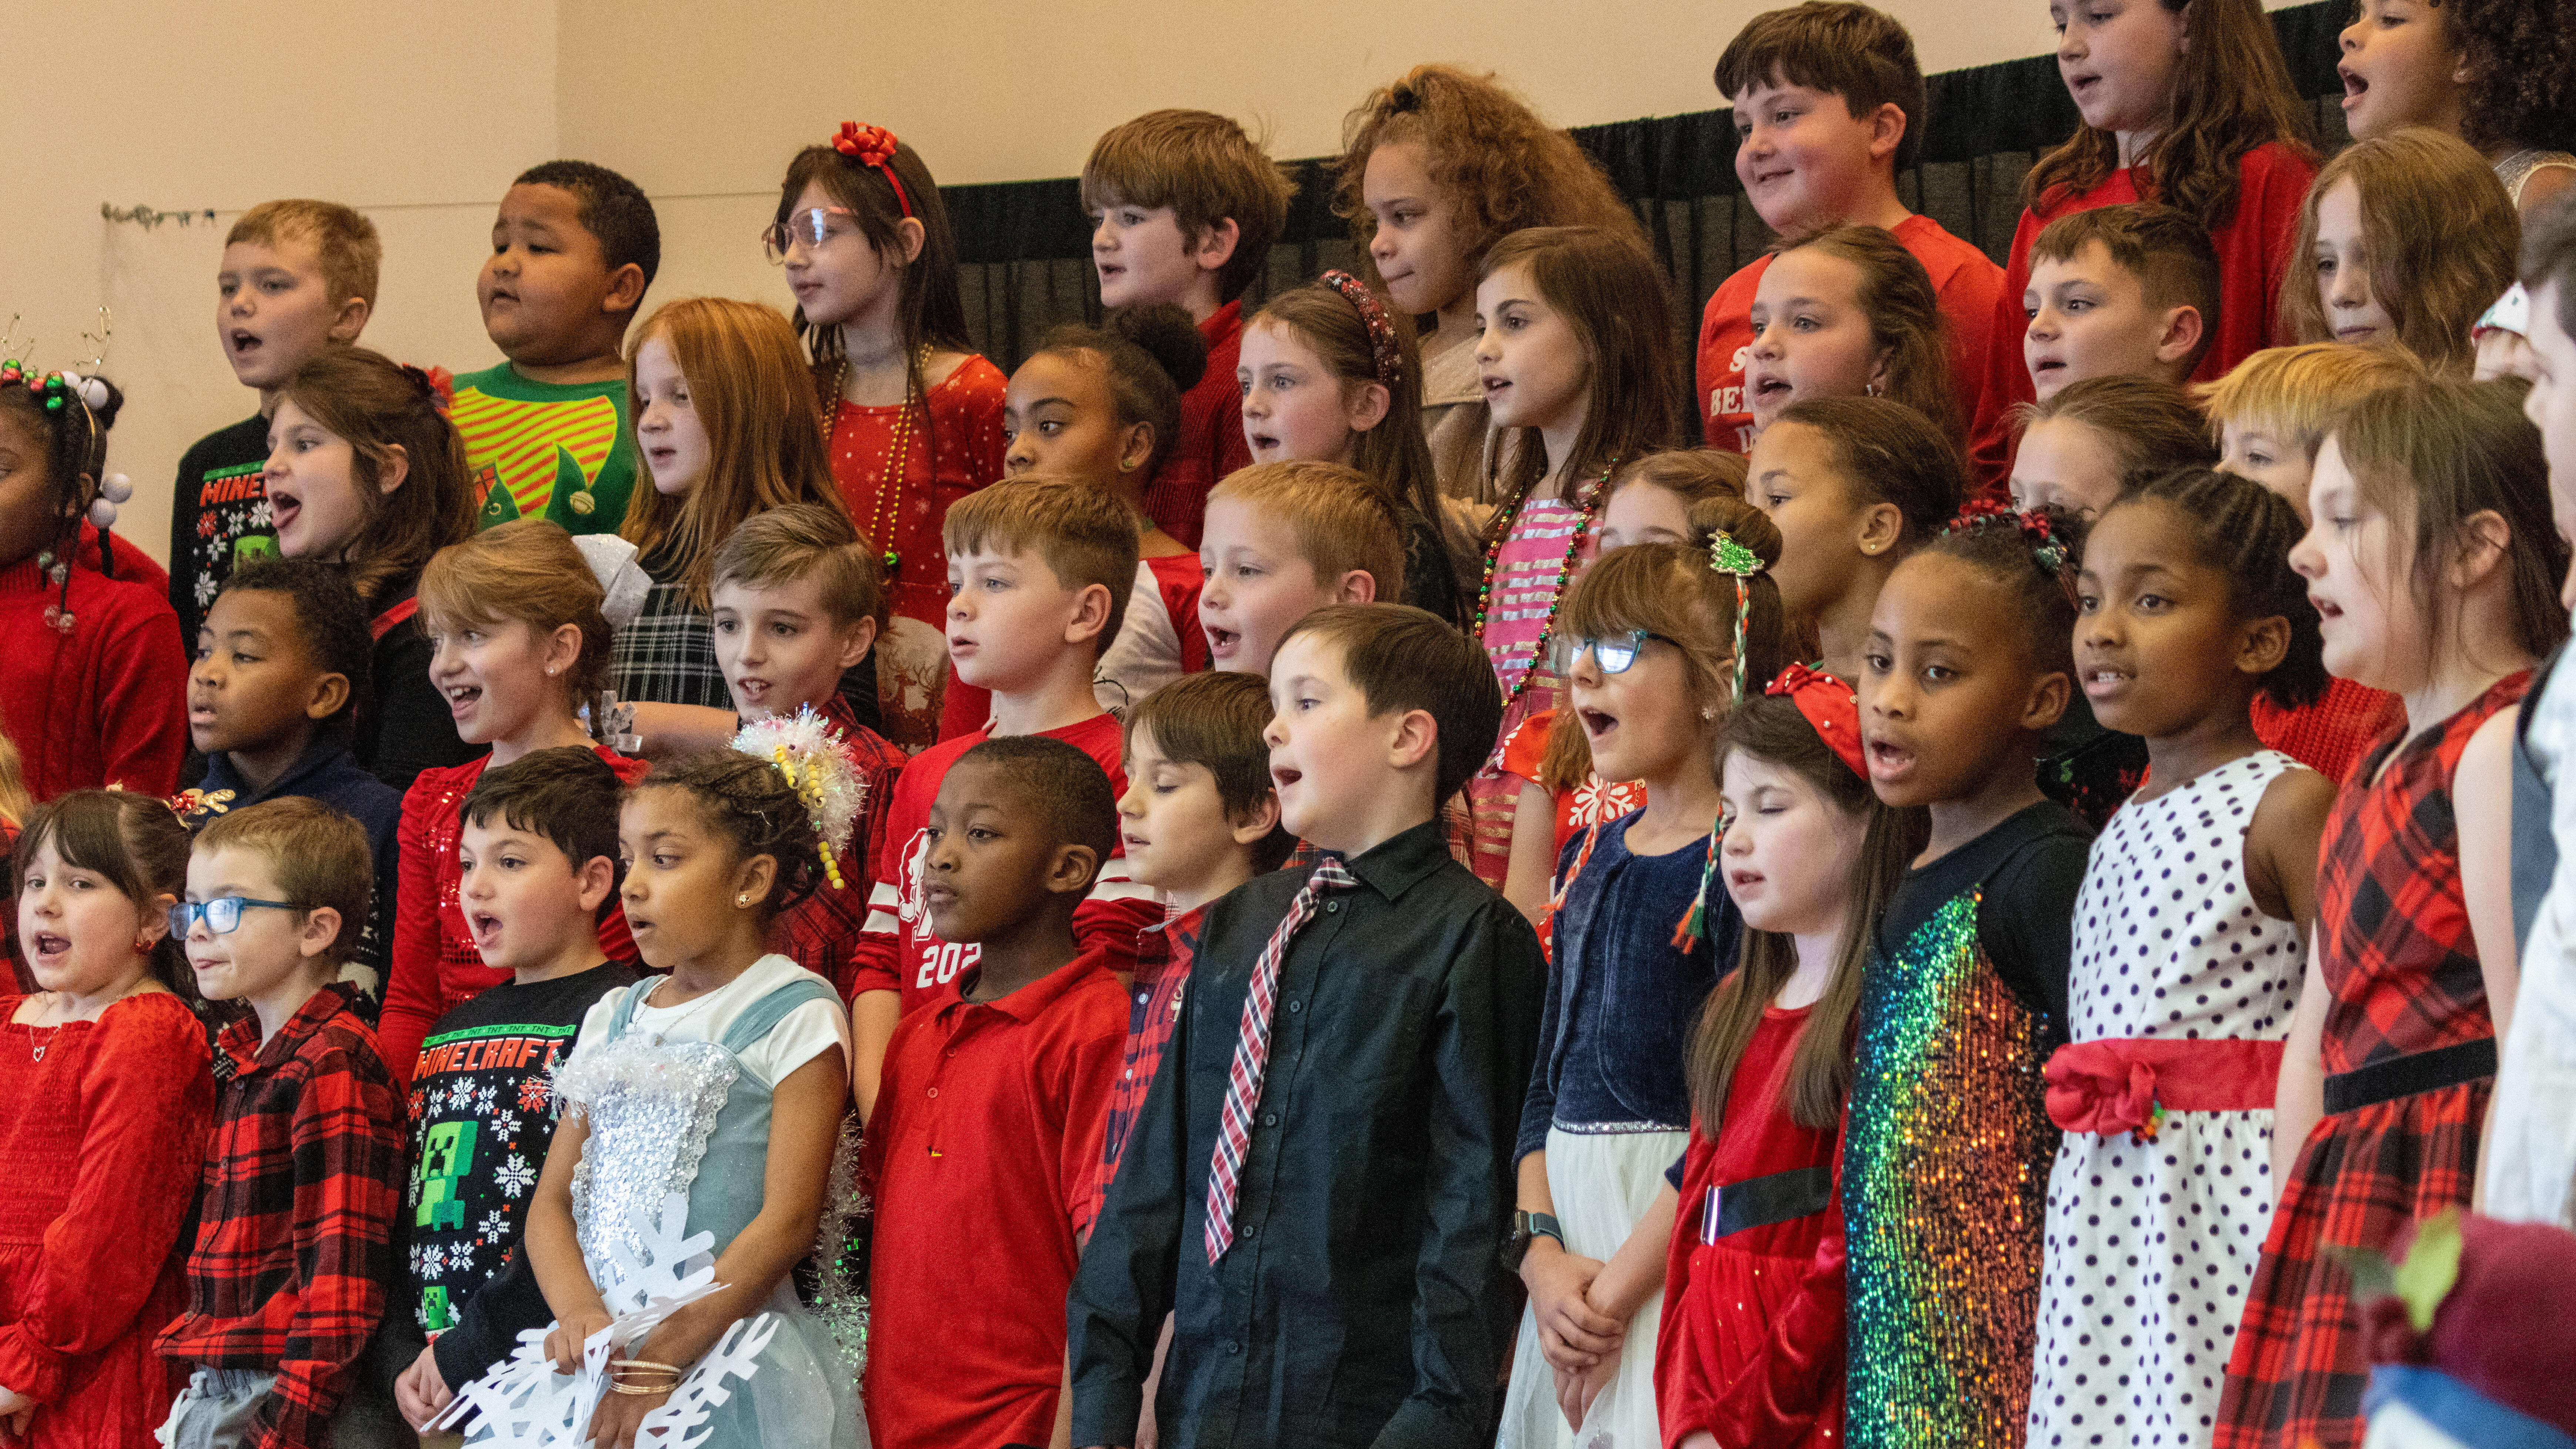 Park students present "Oh, Christmas Tree" winter concert performance